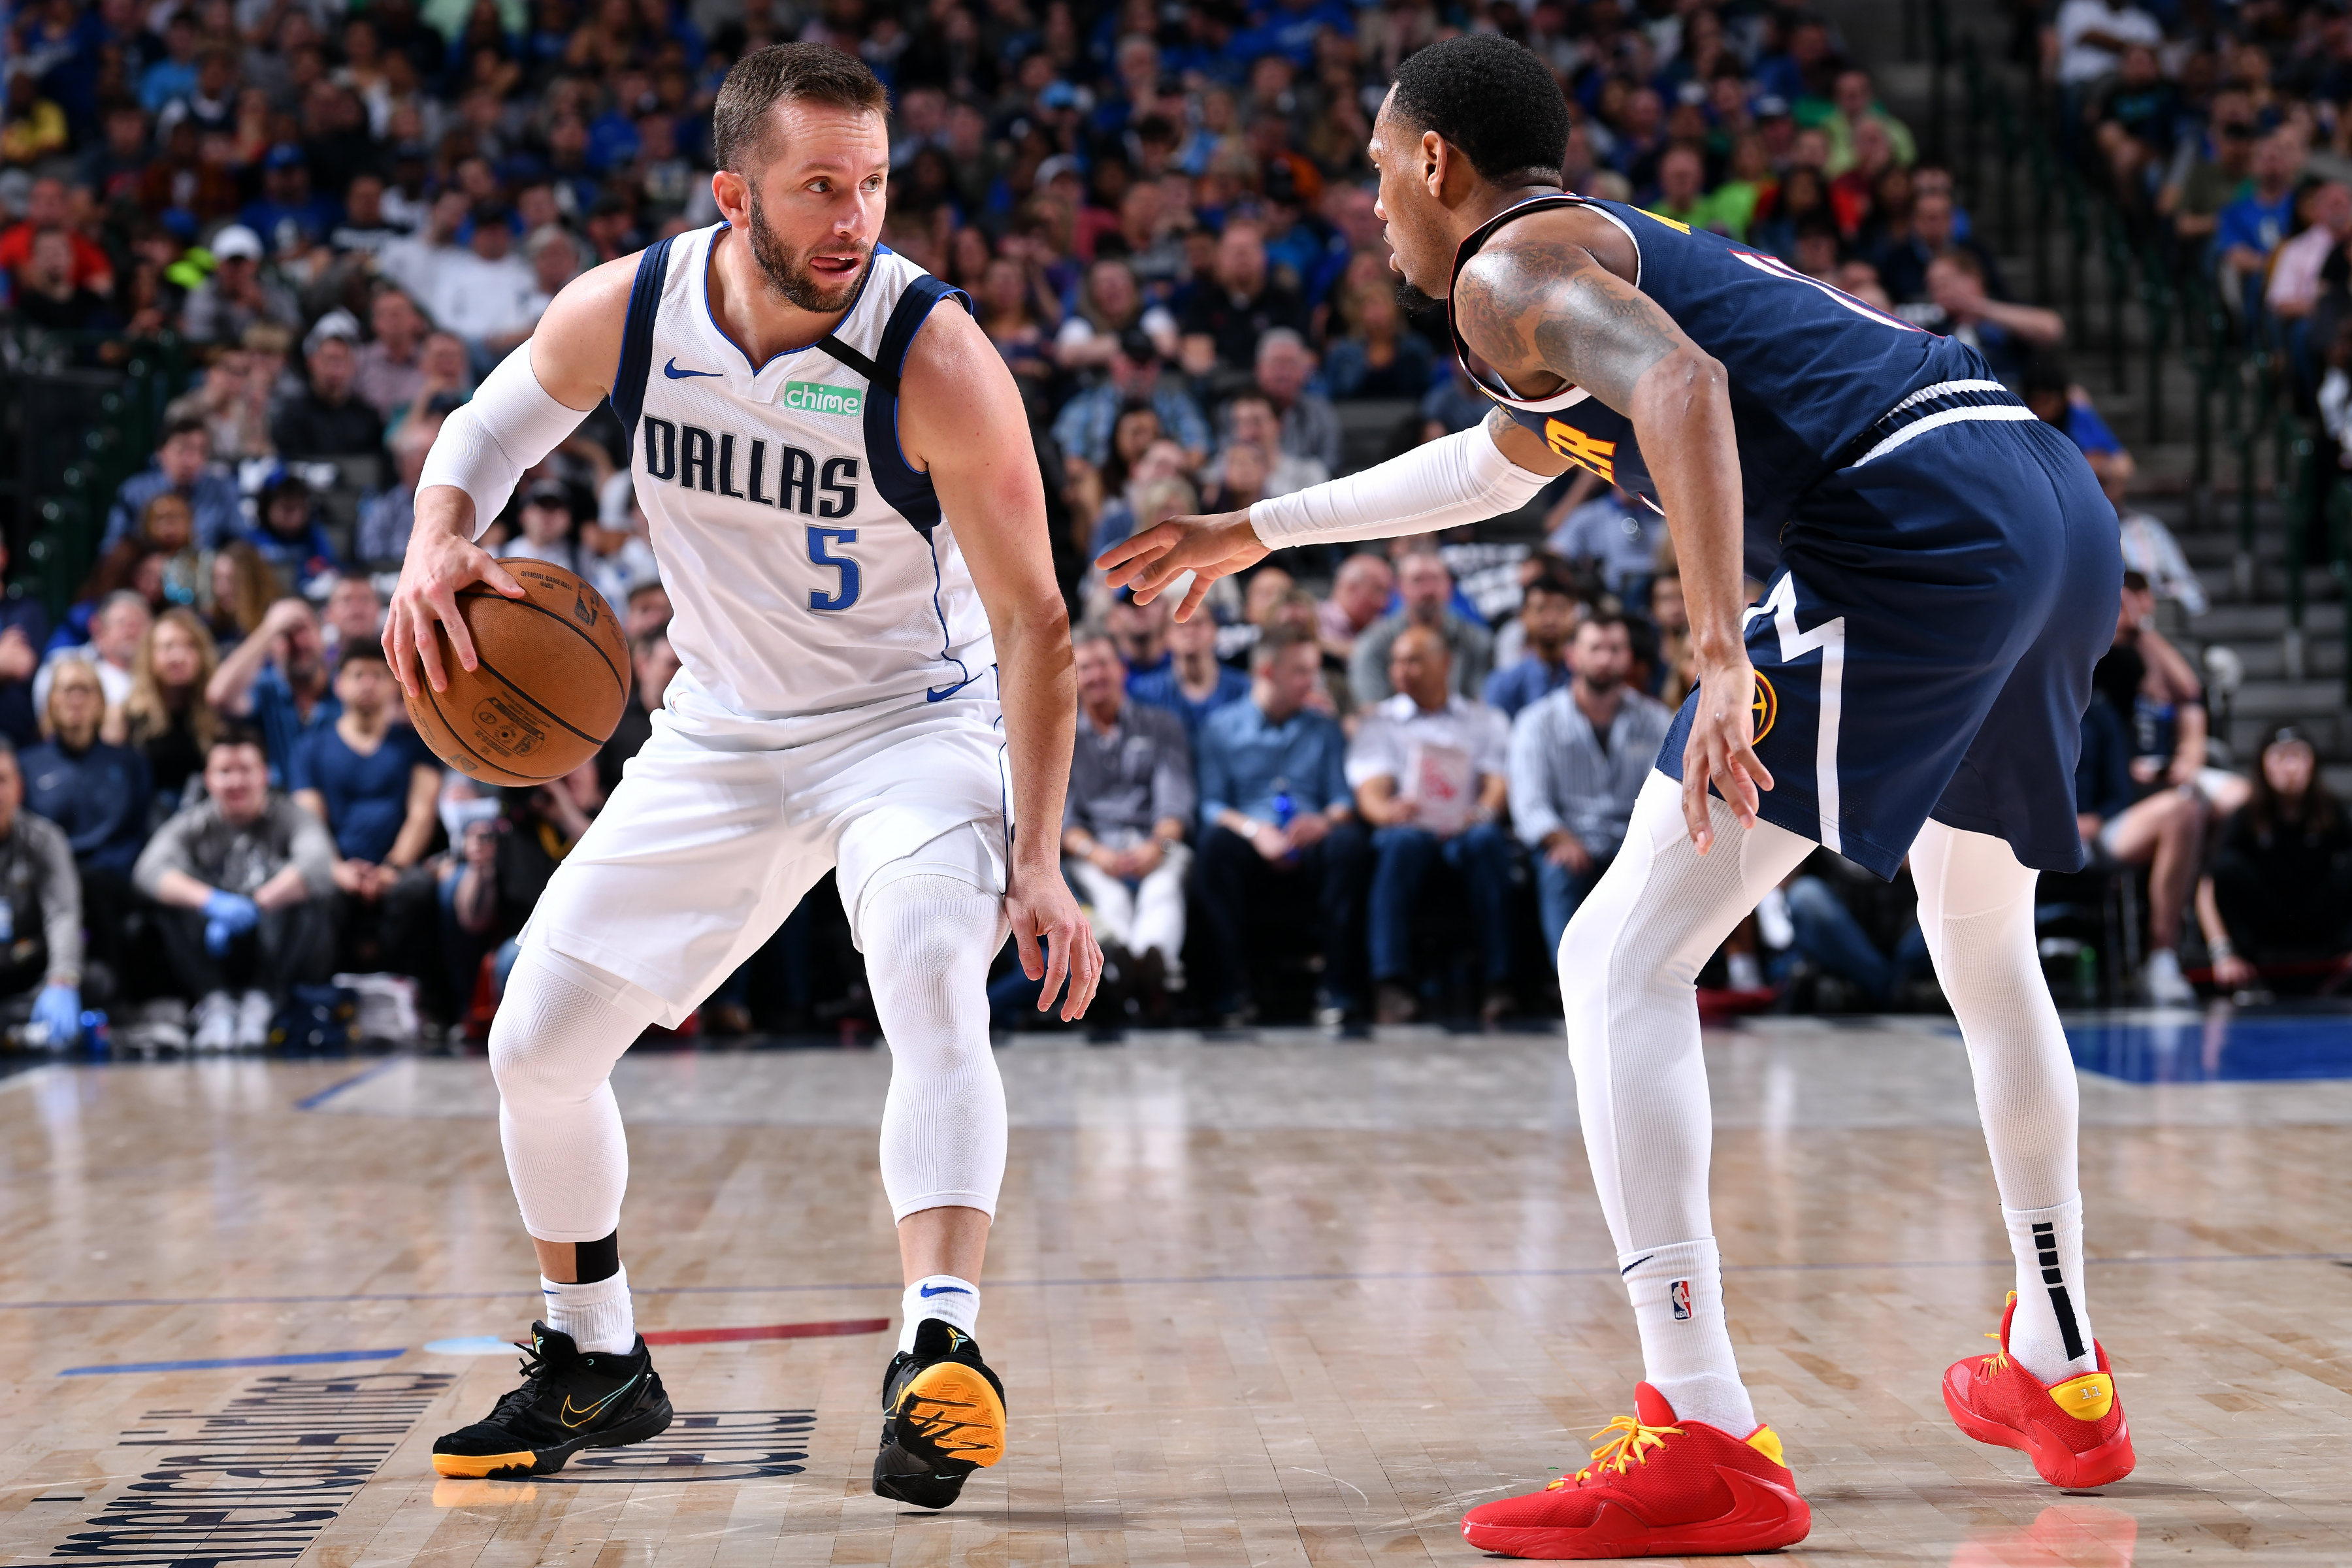 Fan favorite J.J. Barea is glad to be back home with Dallas